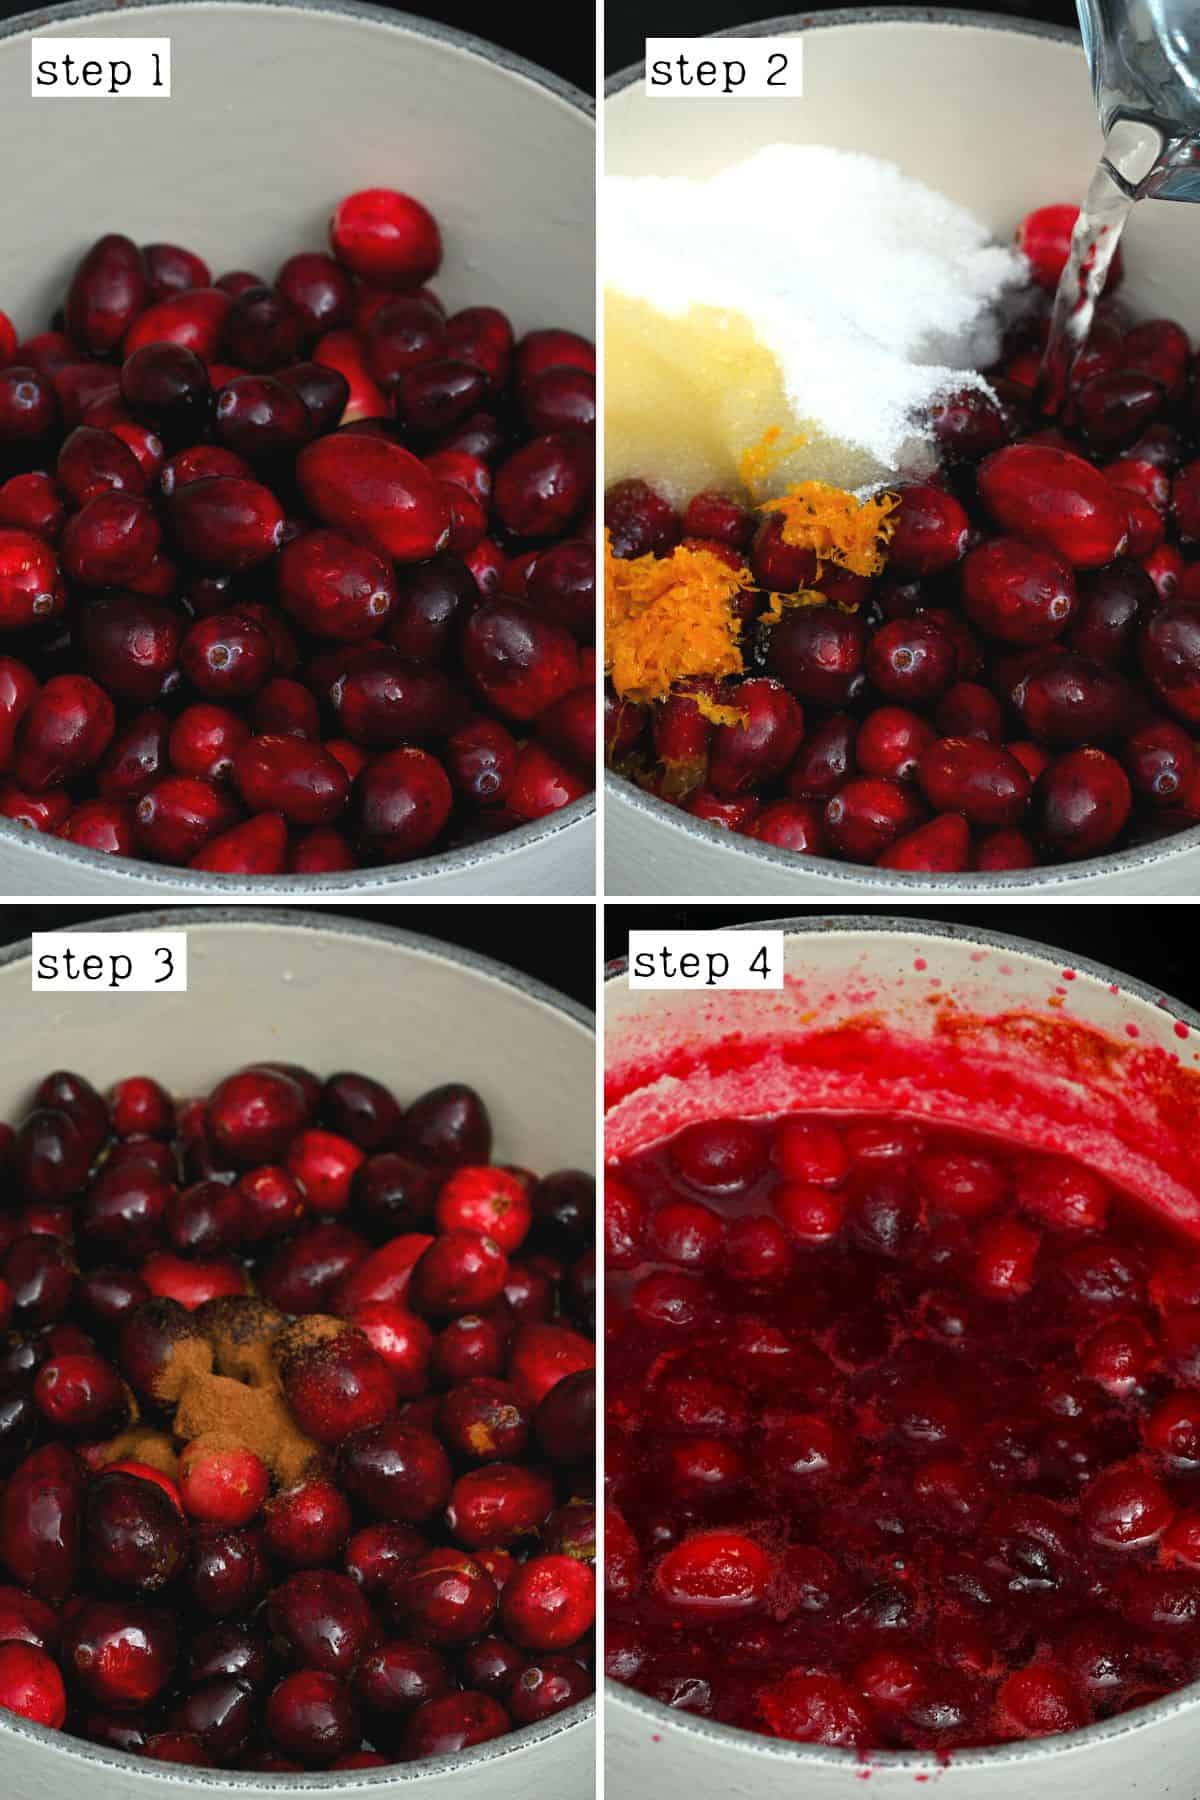 Steps for making cranberry sauce